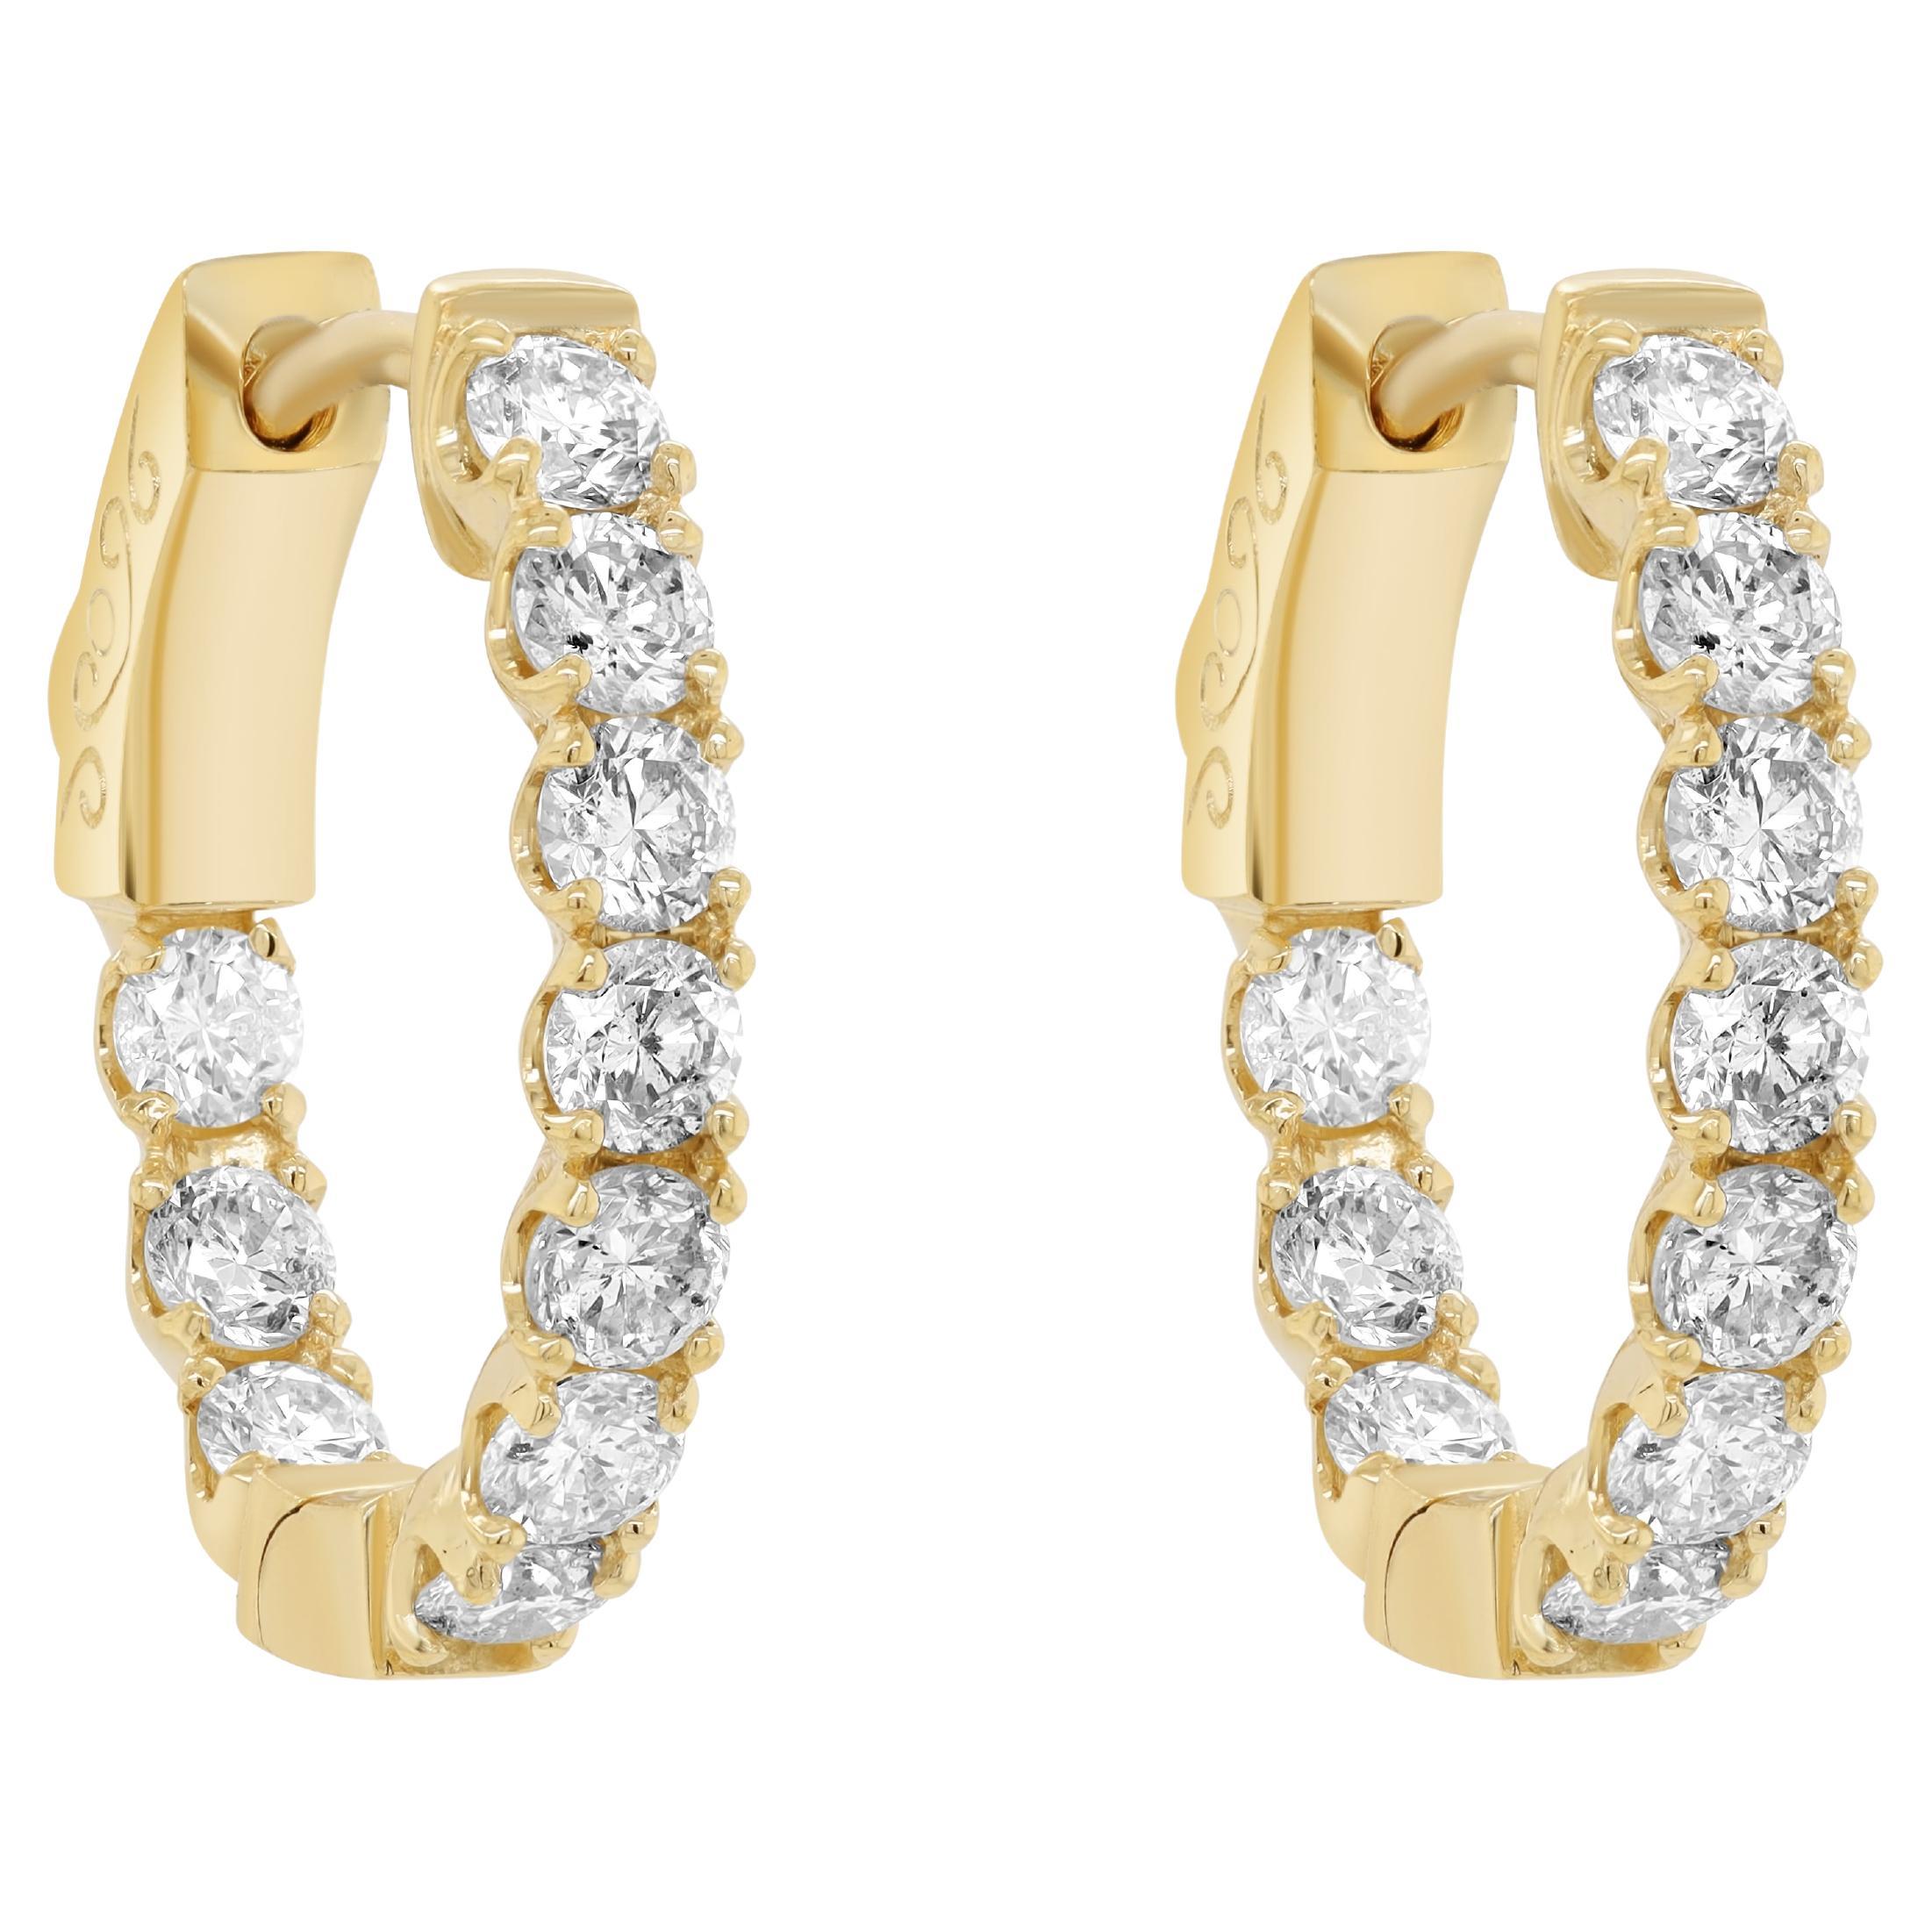 Diana M. 14KT YELLOW GOLD, DIAMOND OVAL HOOPS FEATURES 1.65cts OF DIAMONDS. 